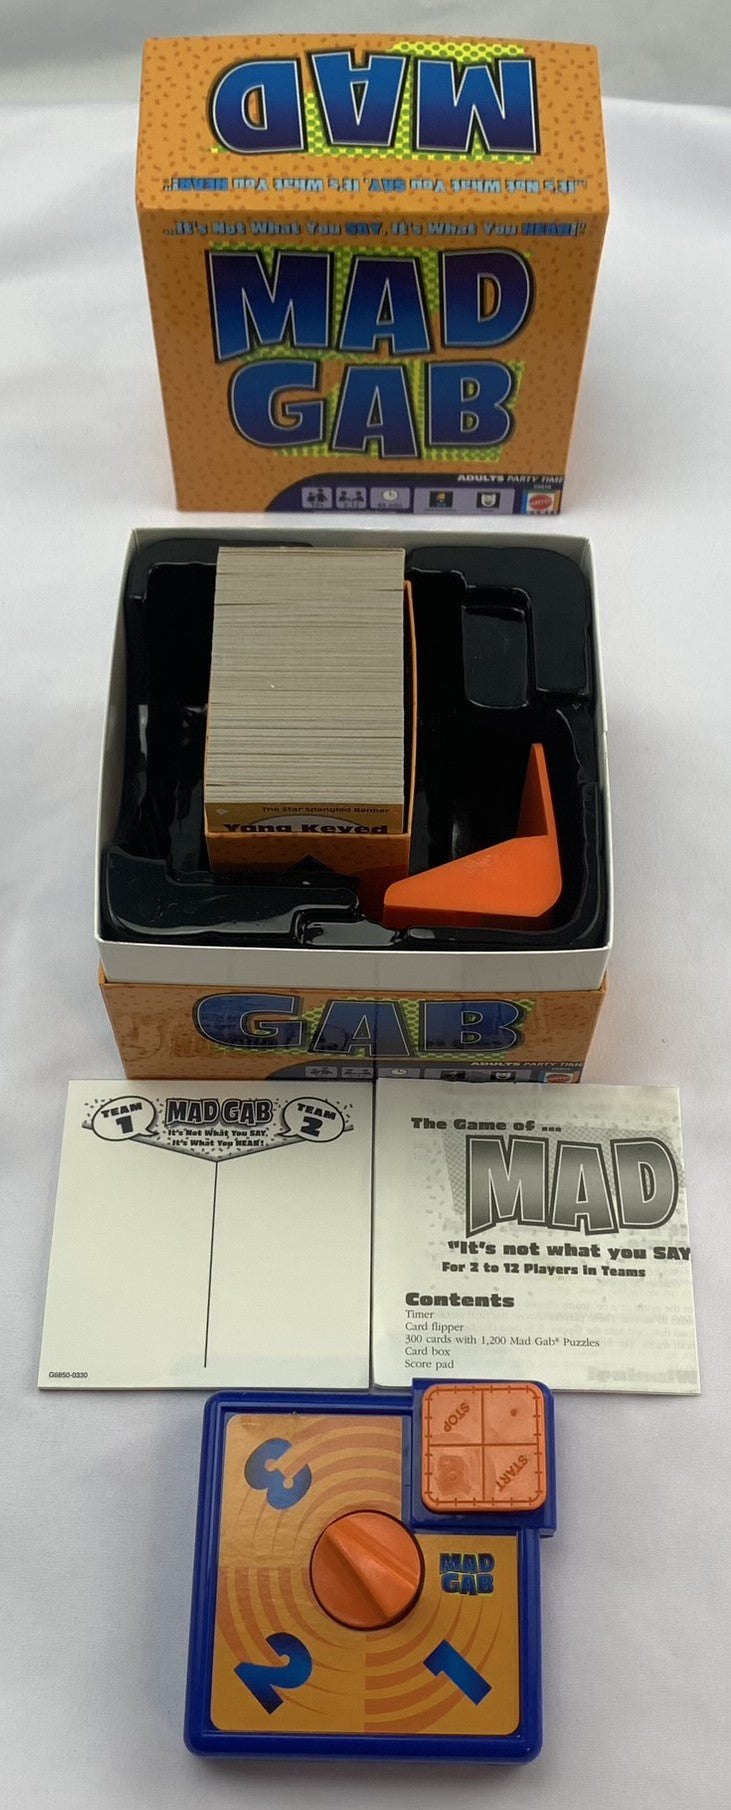 Mad Gab Game - 1995 - Mattel - Great Condition